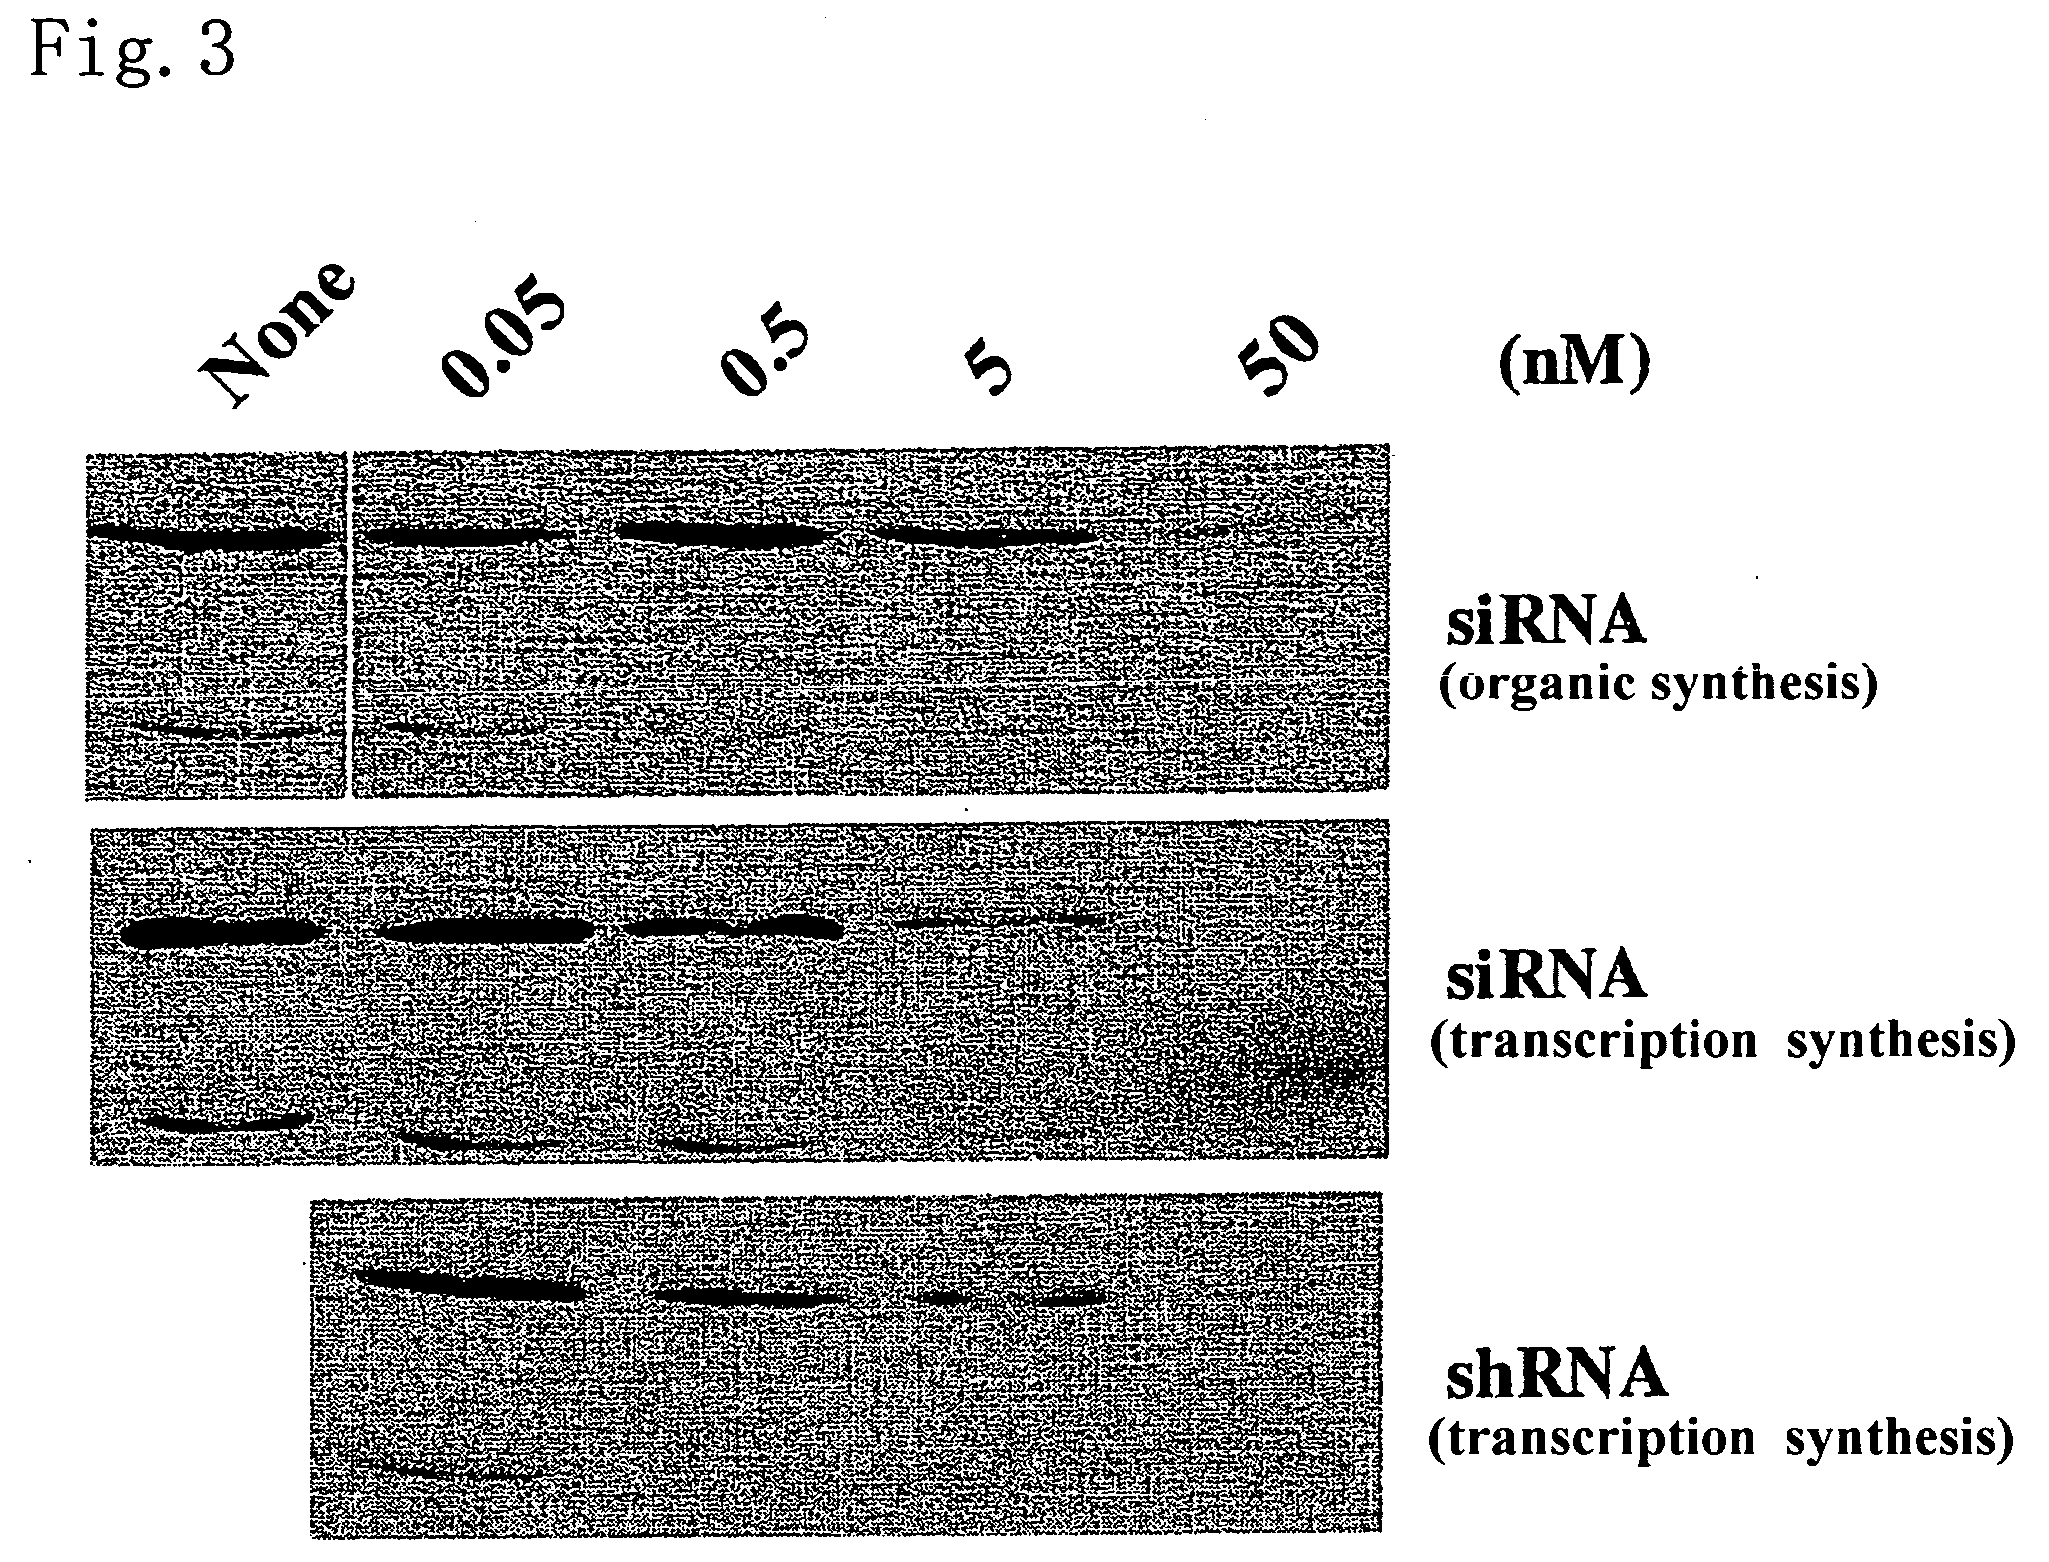 Process for producing sirna